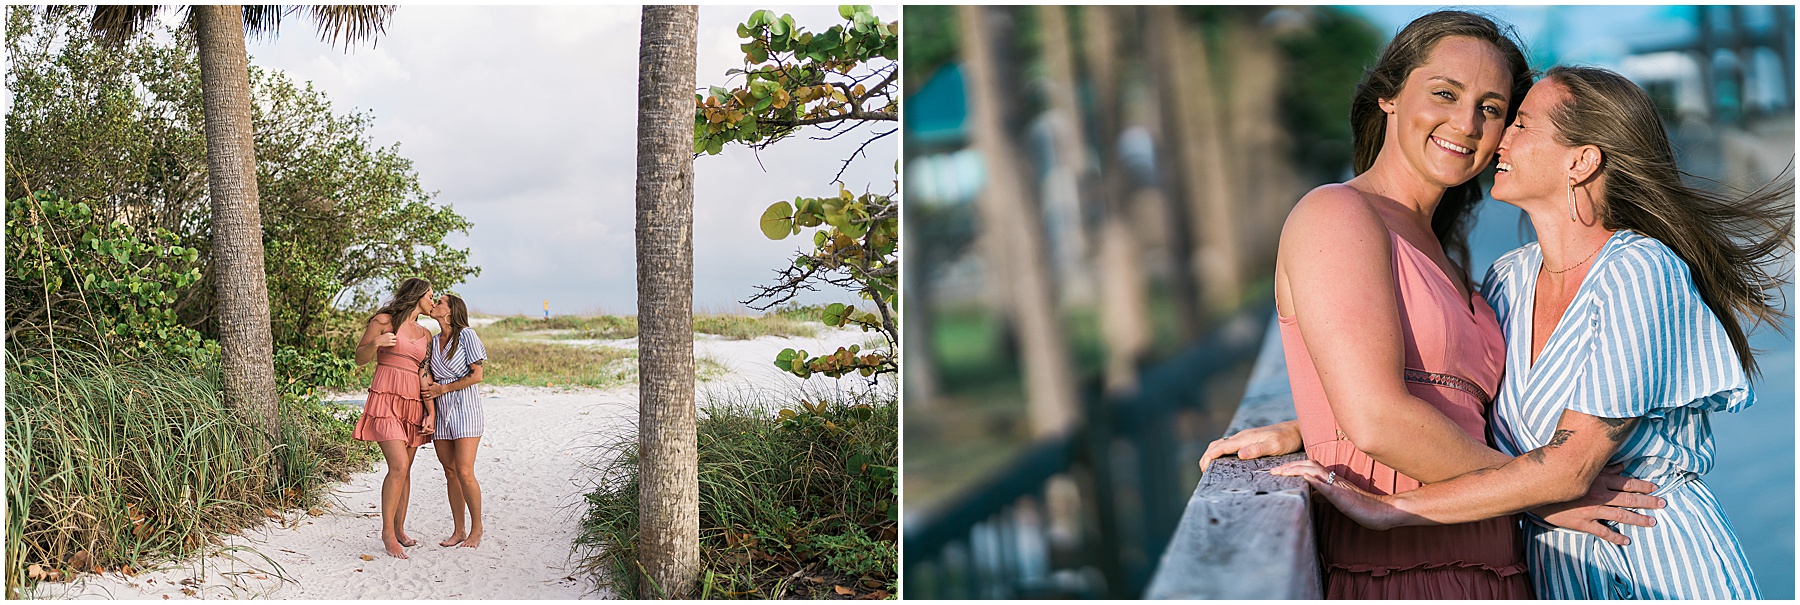 newly engaged couple on the beach during outdoor engagement session